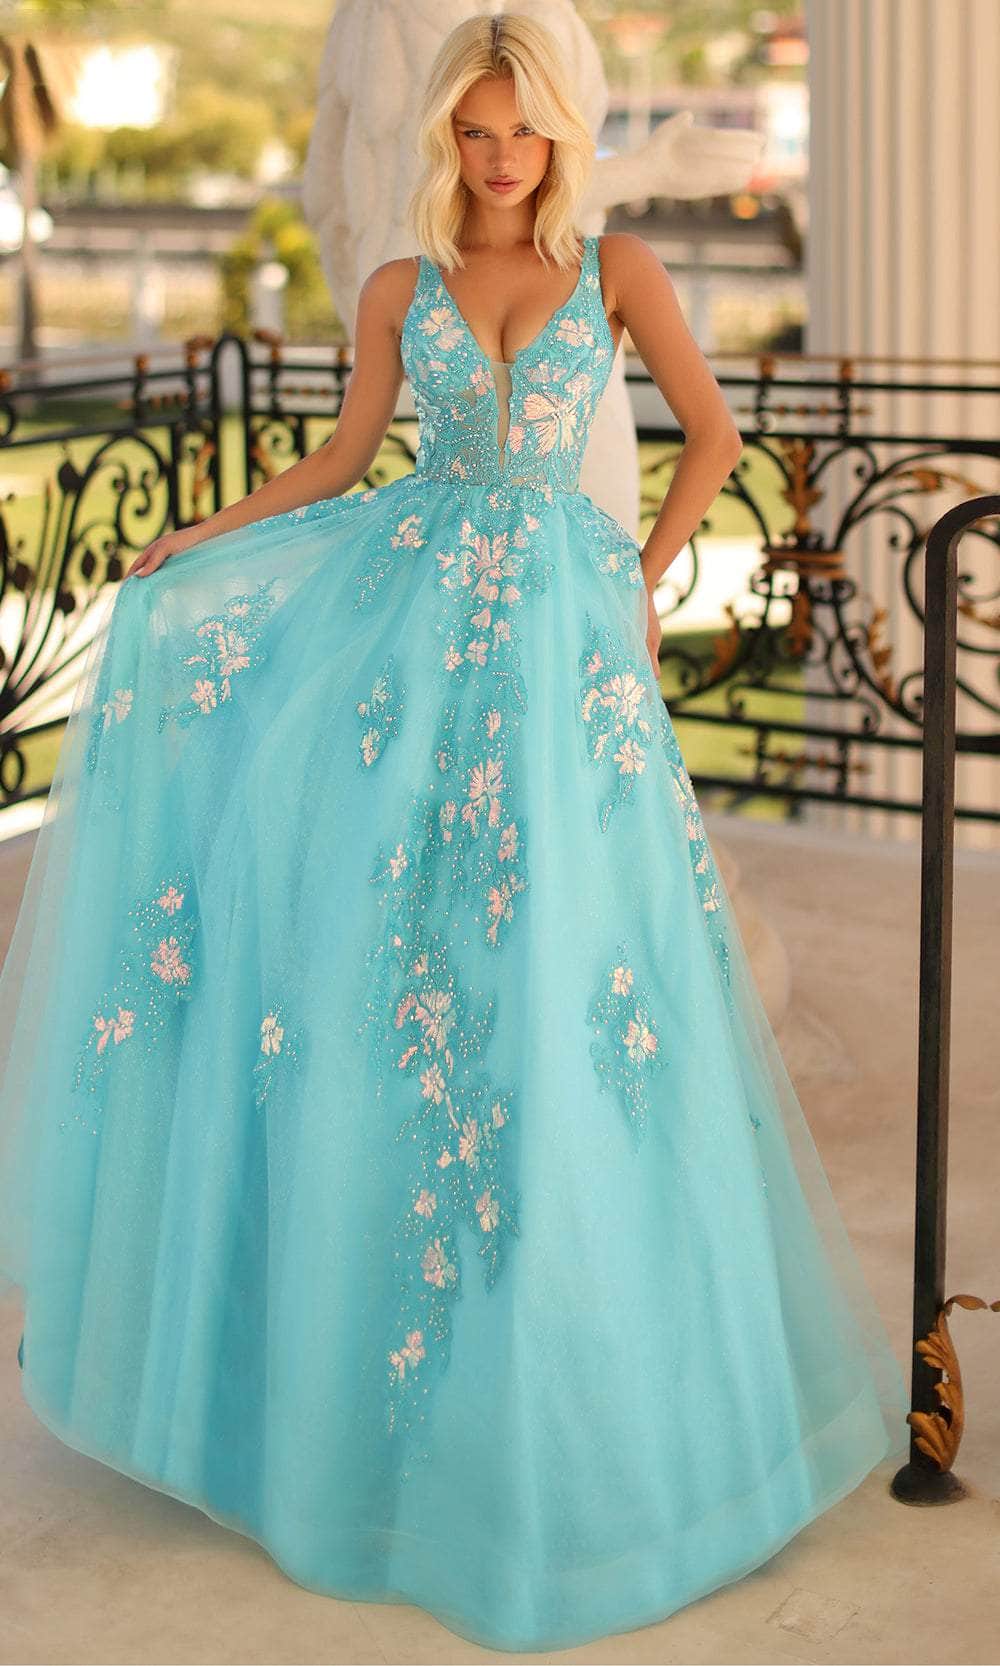 Clarisse 810456 - Embroidered Cutout Back Ballgown Special Occasion Dress 0 / Turquoise